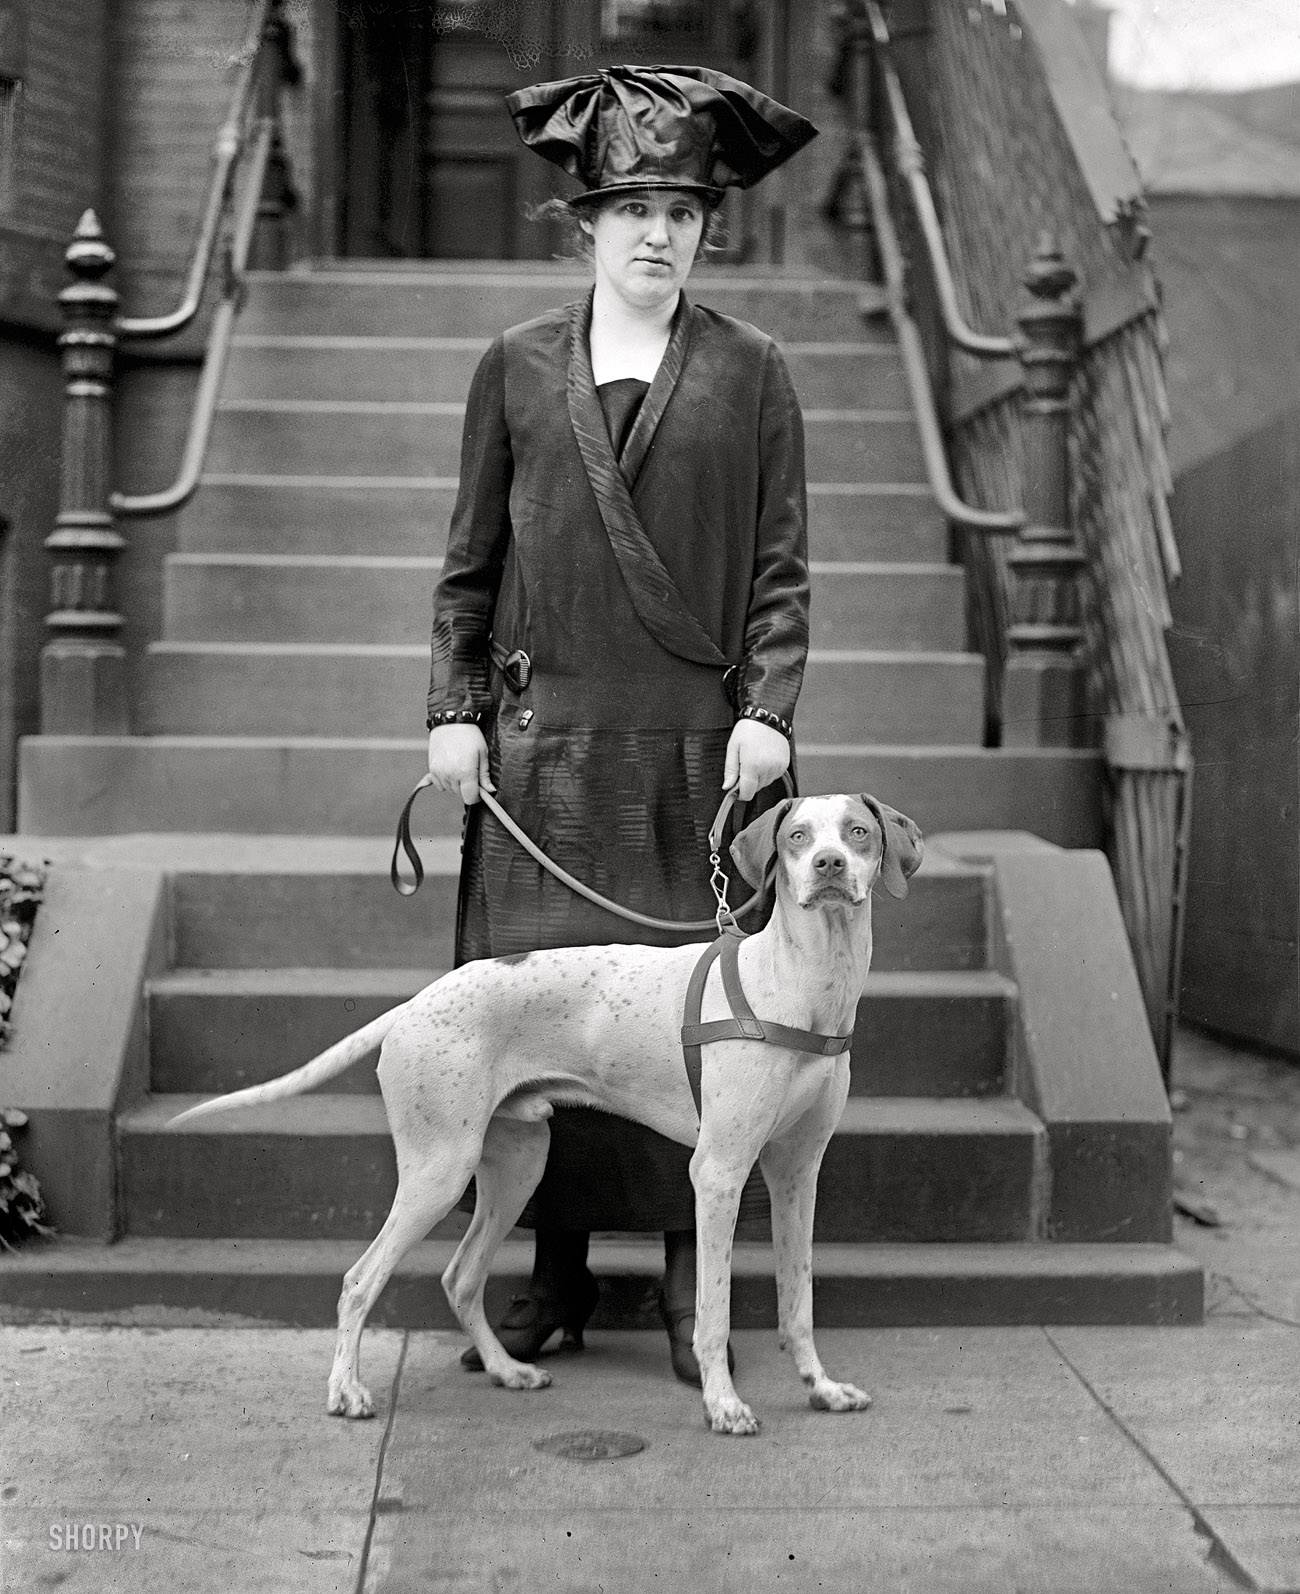 April 10, 1925. Washington, D.C. "Miss Nancy Weeks with Mr. Rowe." National Photo Company Collection glass negative. View full size.